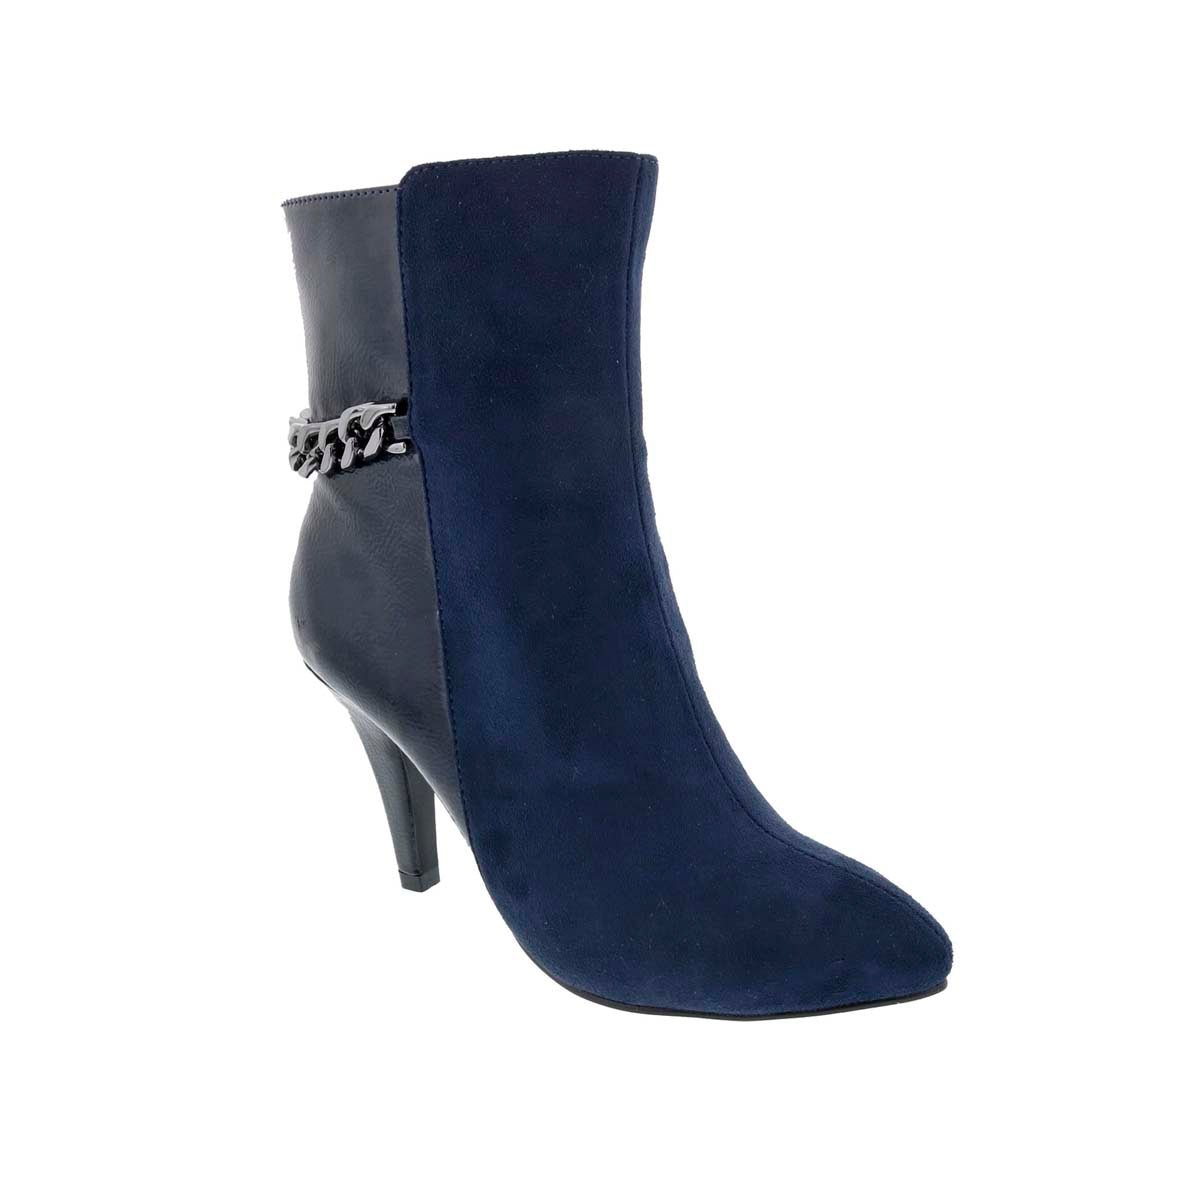 BELLINI CHAIN WOMEN BOOTIES IN NAVY MICRO/PATENT - TLW Shoes